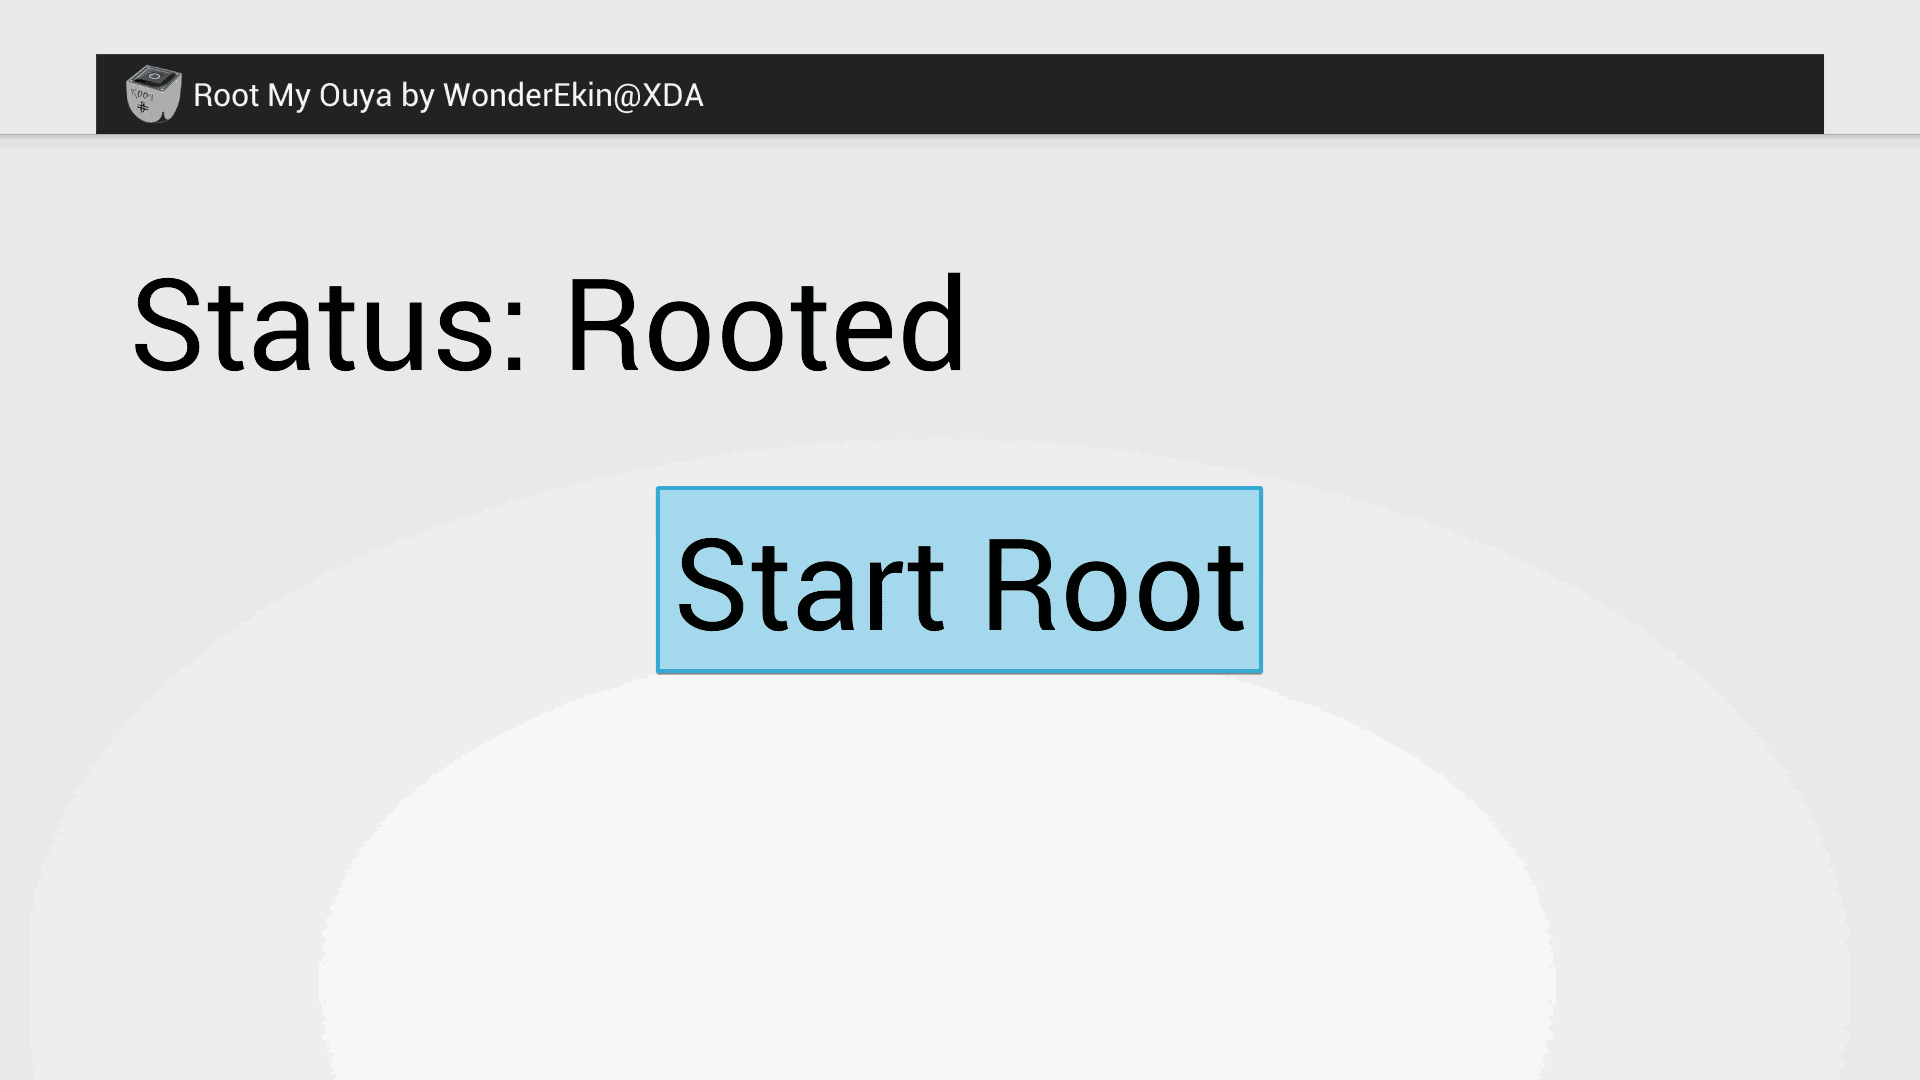 Root the Ouya - Start the Root